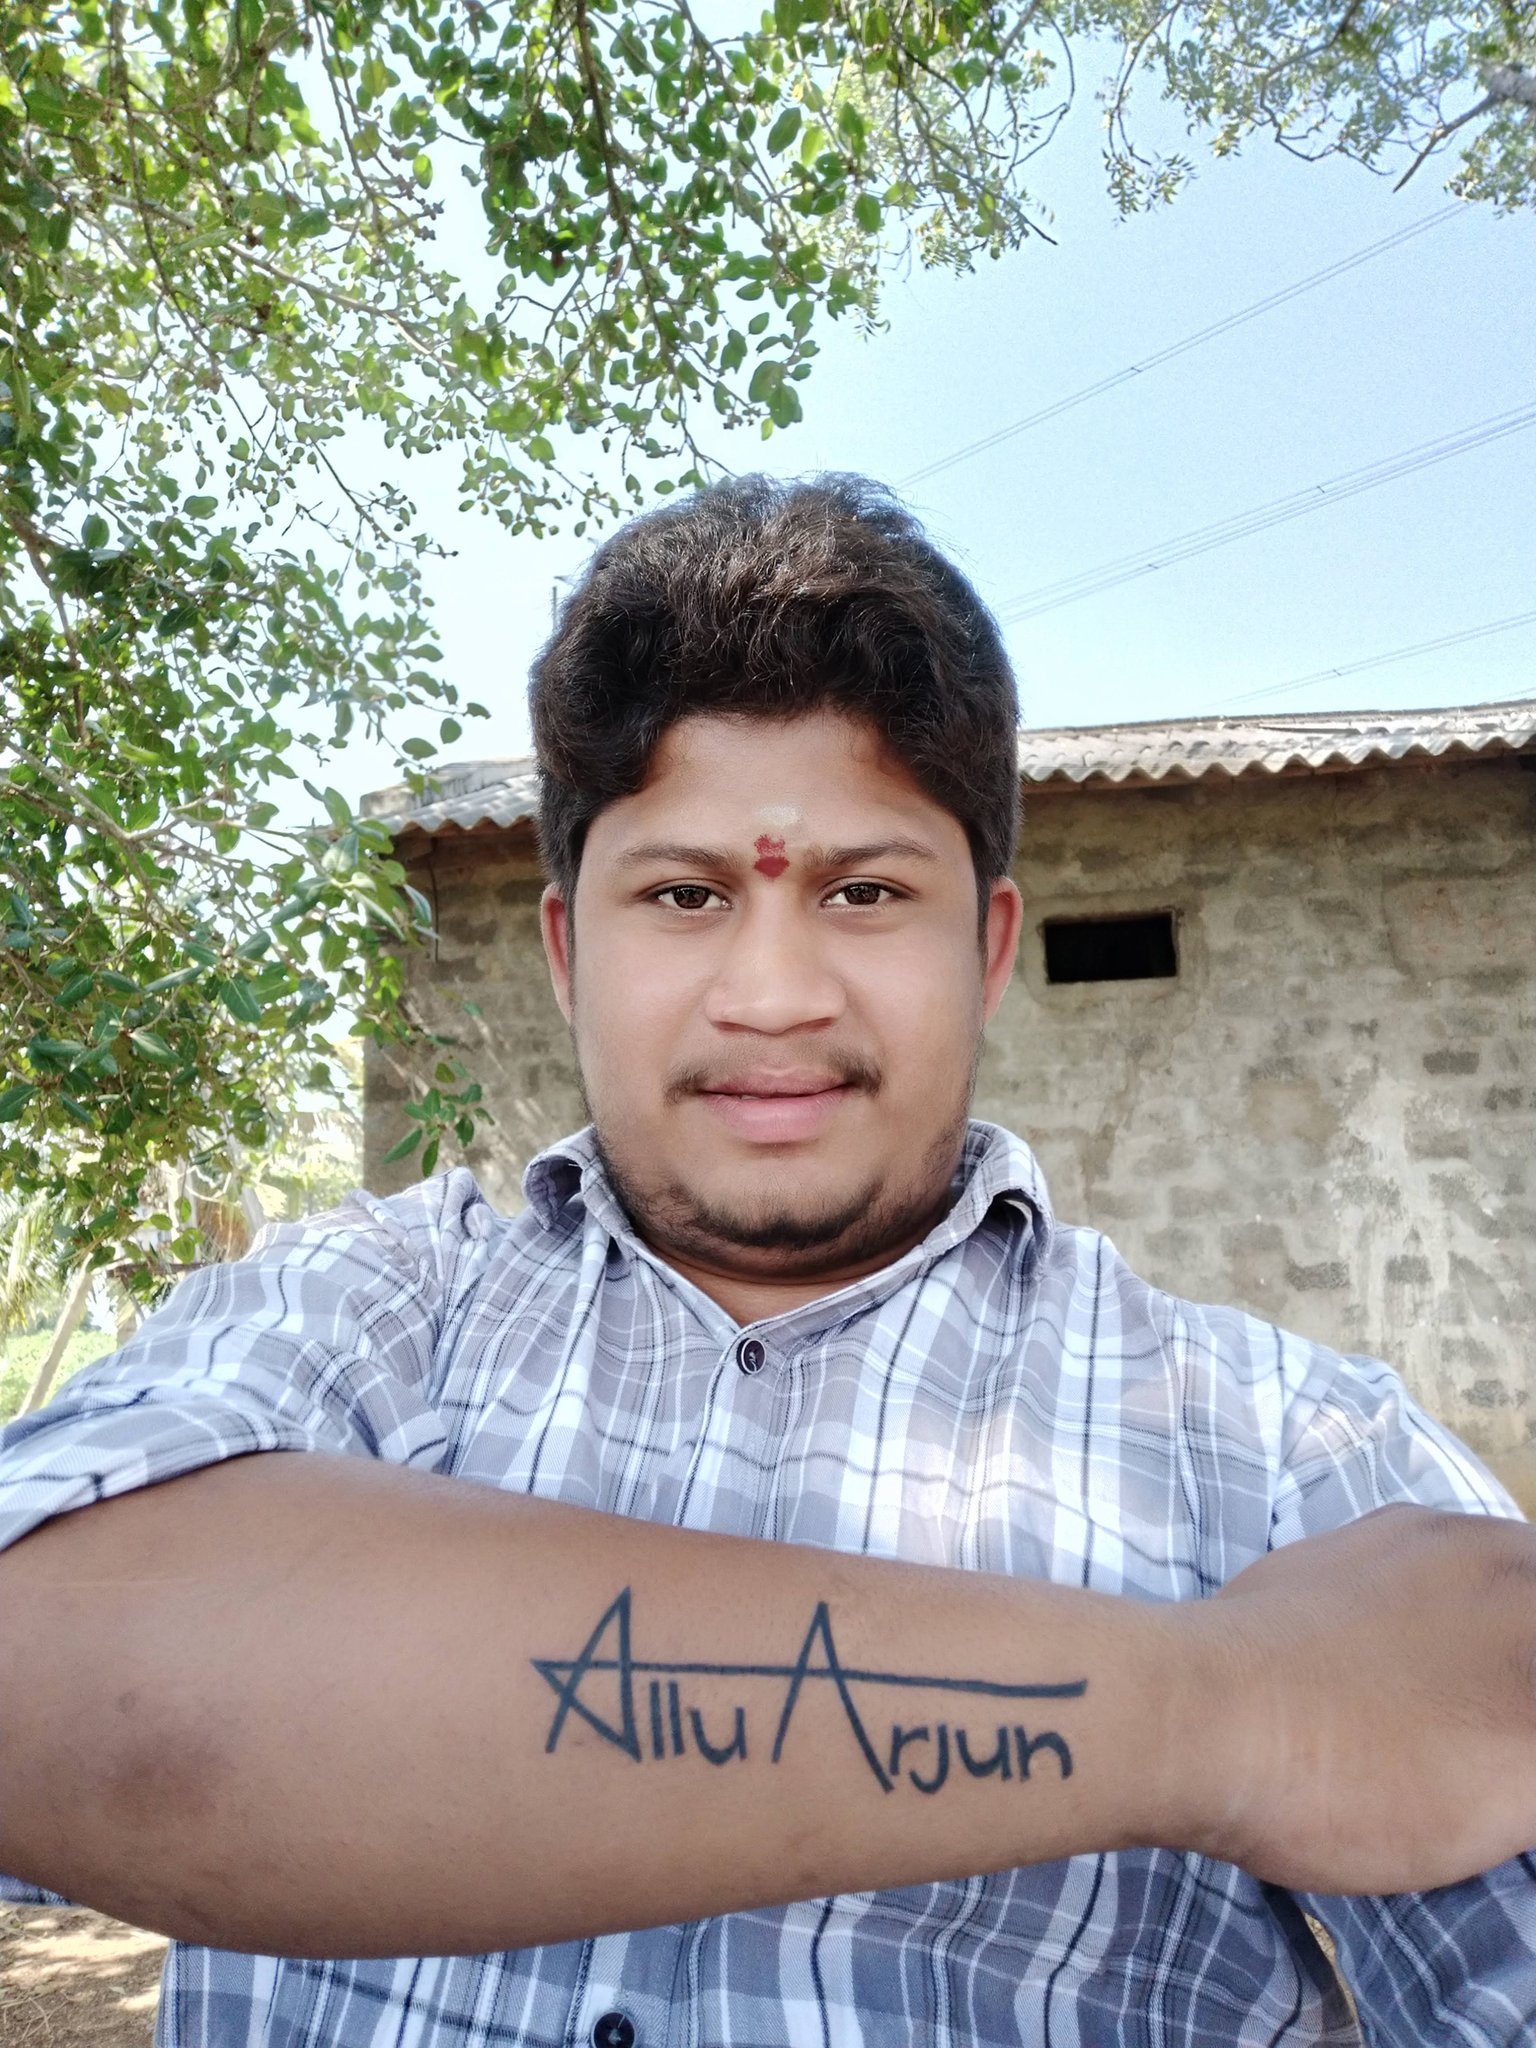 Details 65+ about vasanth name tattoo image unmissable .vn